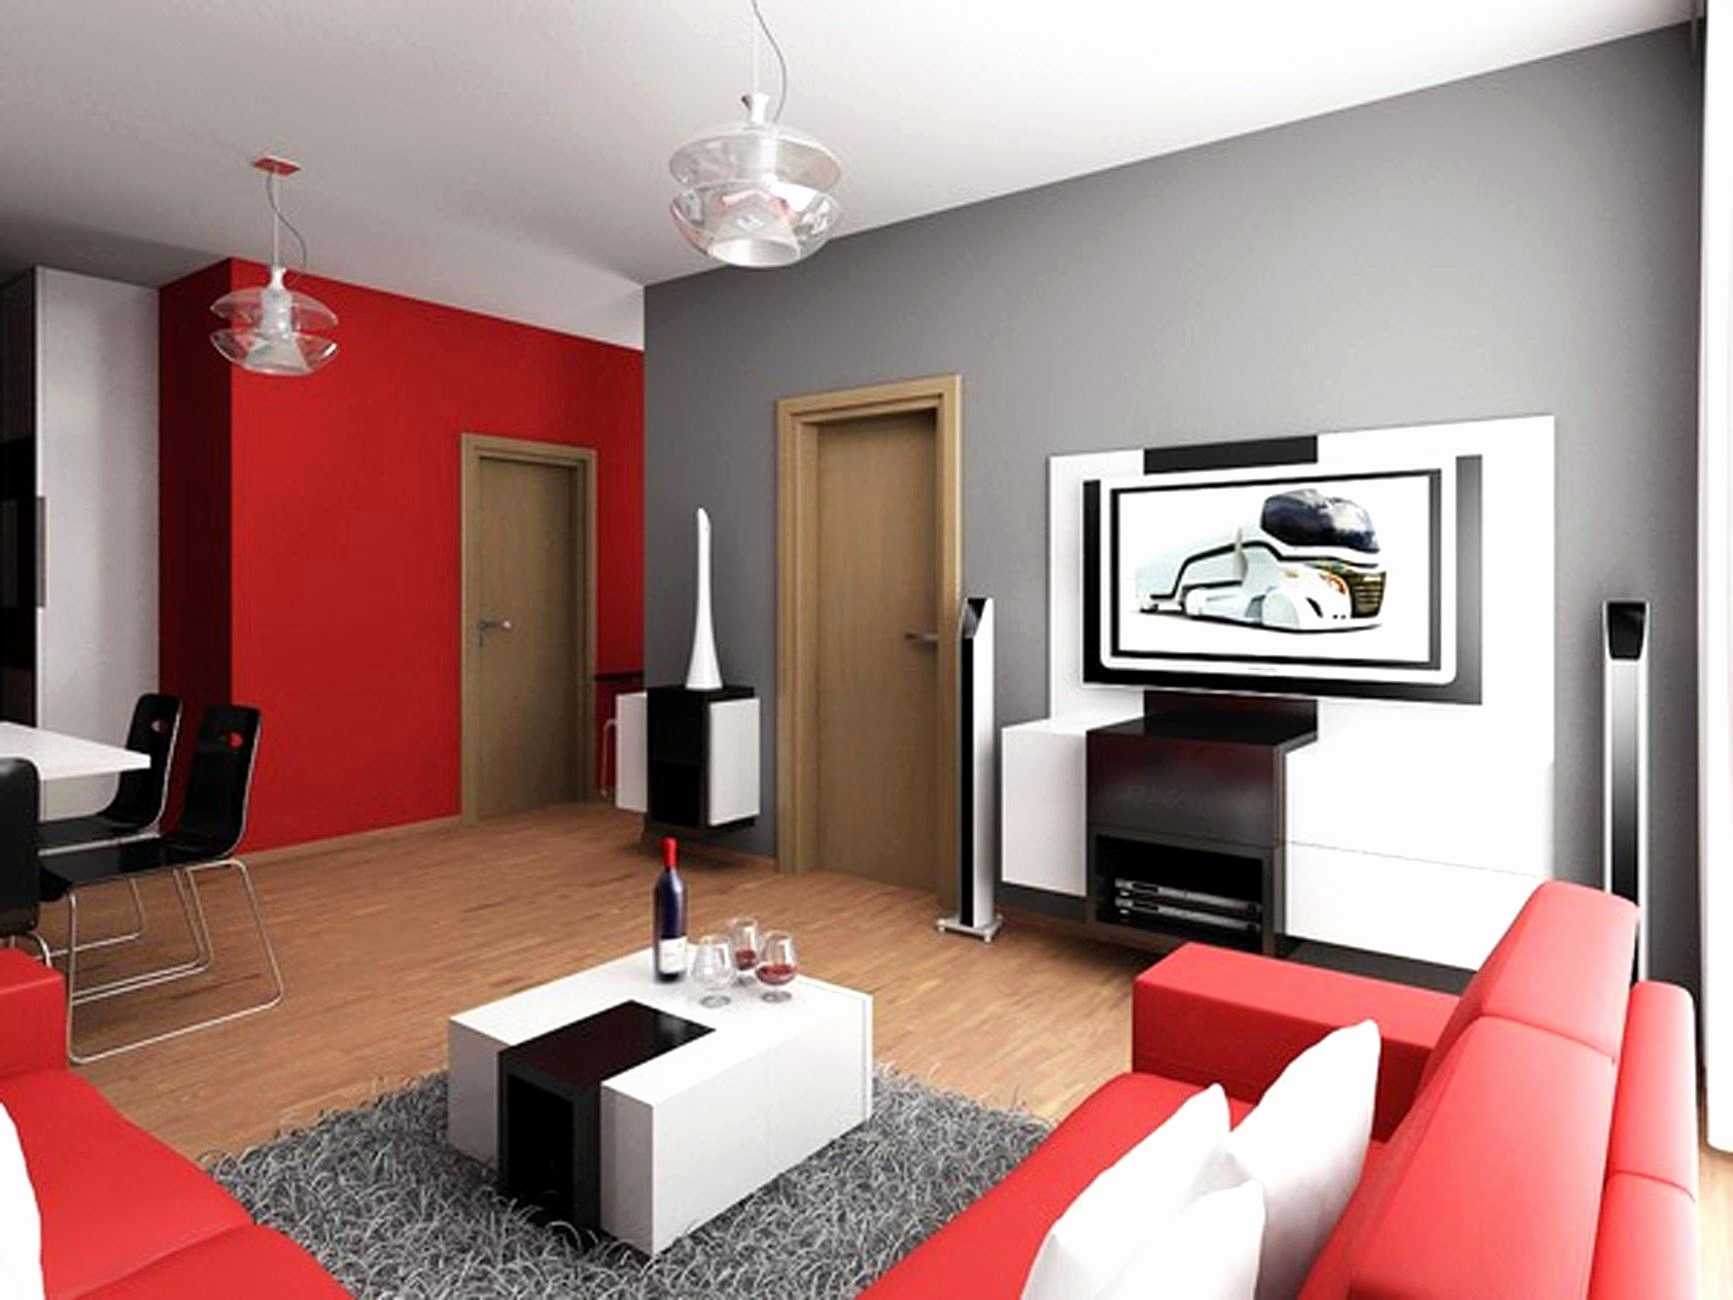 Minimalist living room in red and gray